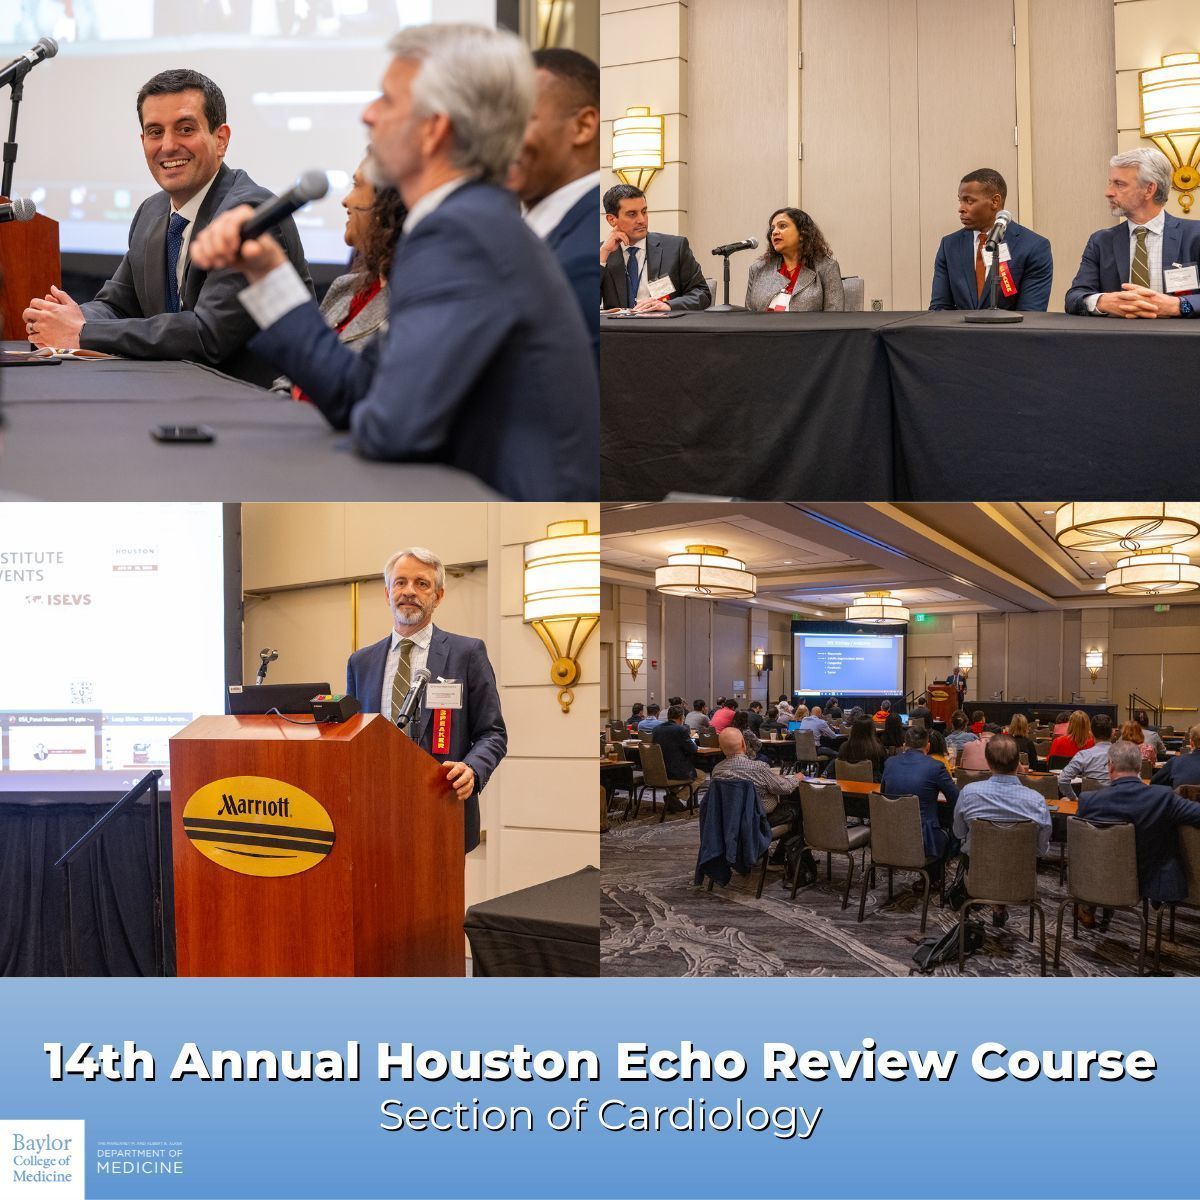 The Section of Cardiology hosted the 14th Annual Houston Echo Review Course with the Texas Heart Institute and the Greater Houston Society of Echo-Vascular! Thank you to our Course Director, Dr. Raymond Stainback, and Co-Director Dr. Enrique Garcia-Sayan for their initiative. 👏